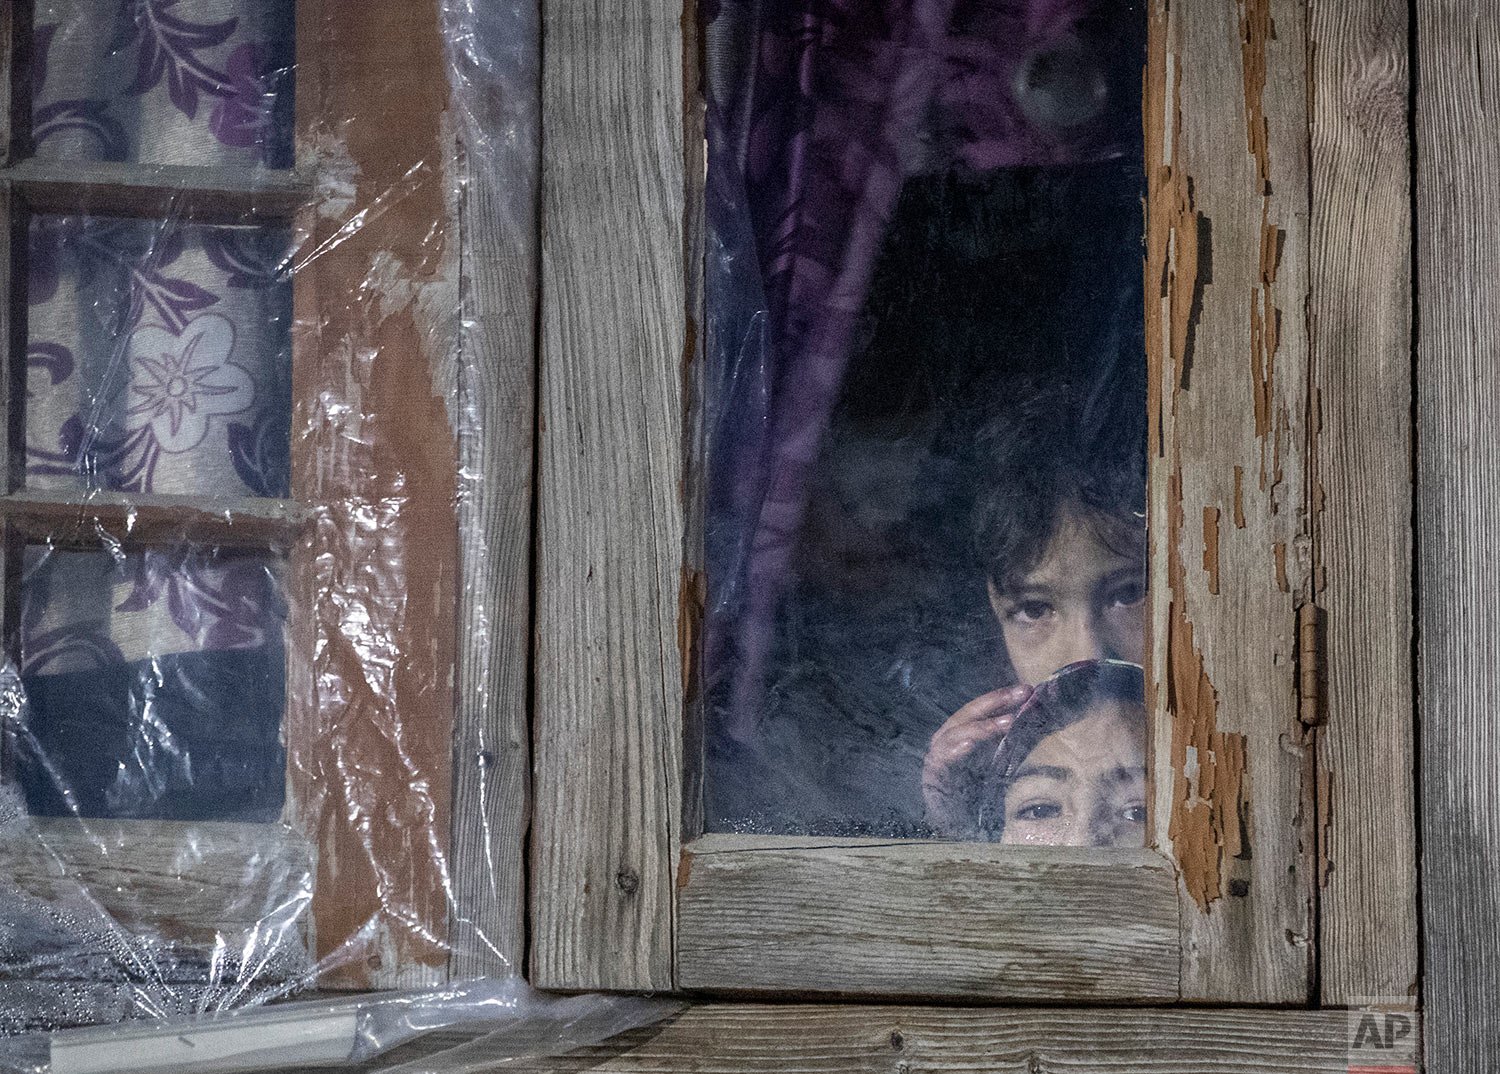  Kashmiri children look out from behind a closed window of their house during a counterinsurgency operation on the outskirts of Srinagar, Indian controlled Kashmir, Monday, Jan. 3, 2022.  (AP Photo/Mukhtar Khan) 